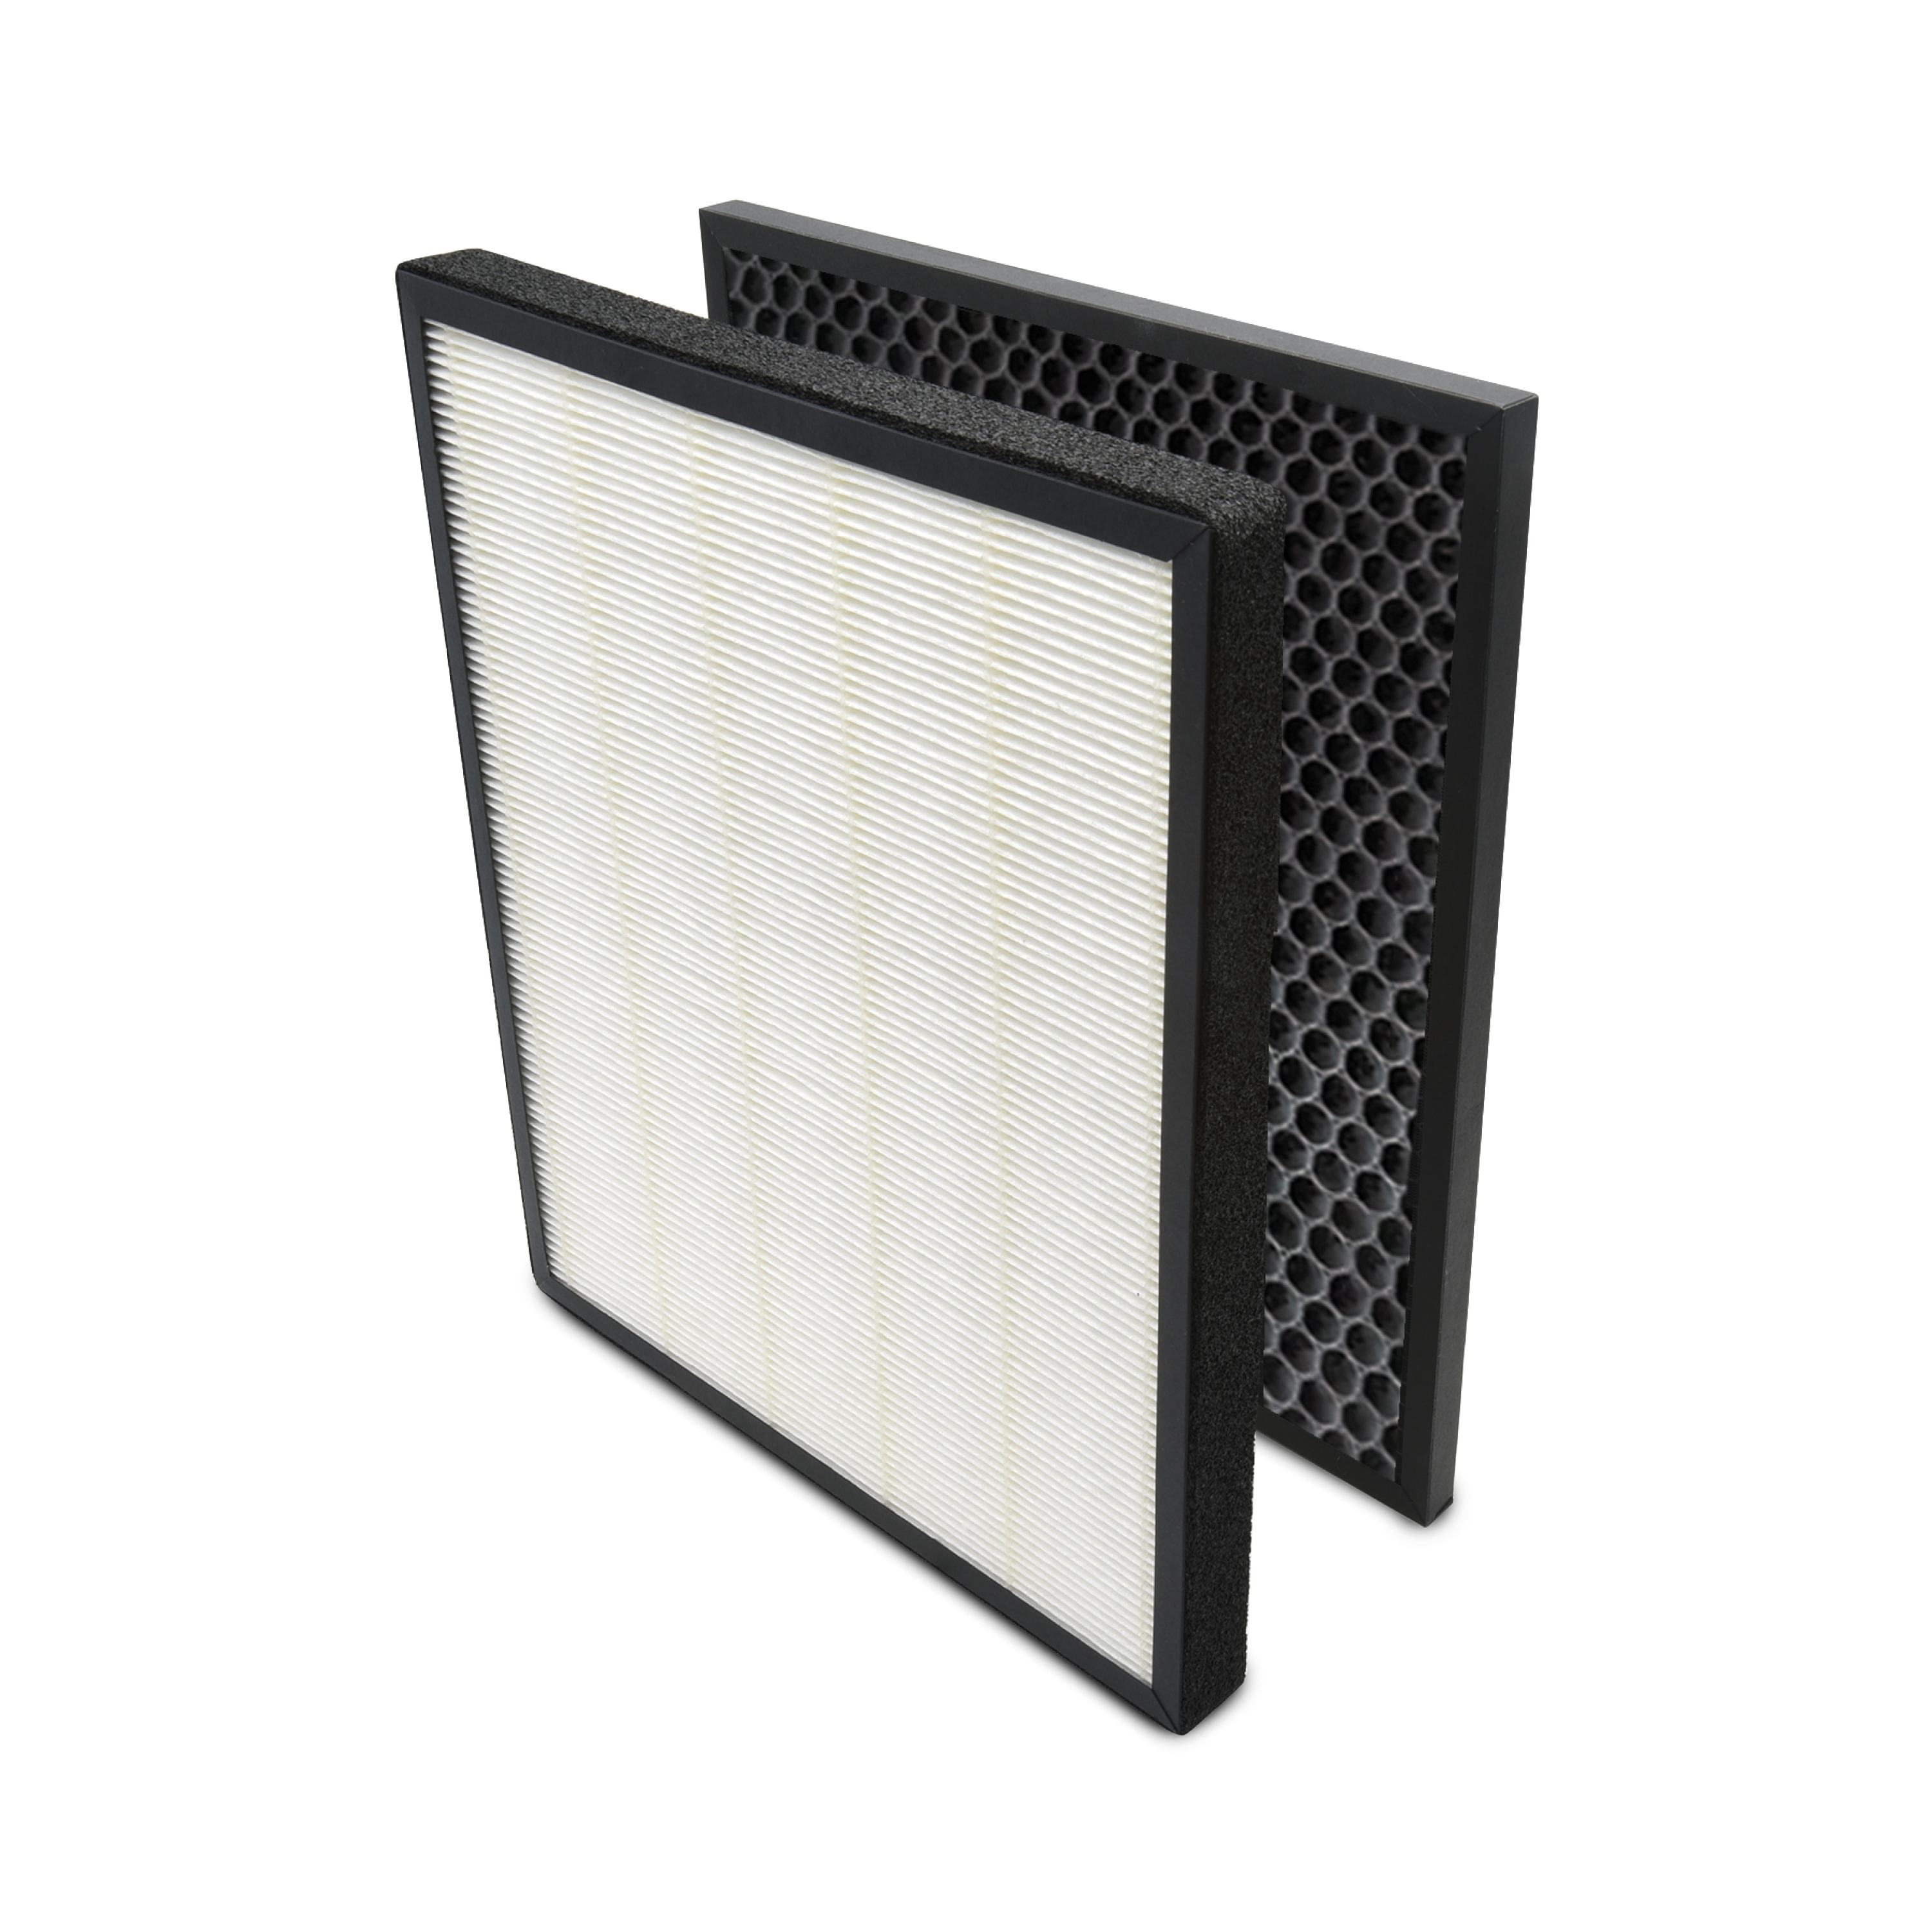 Activated Carbon Panel True HEPA Filter Replacements for Levoit LV